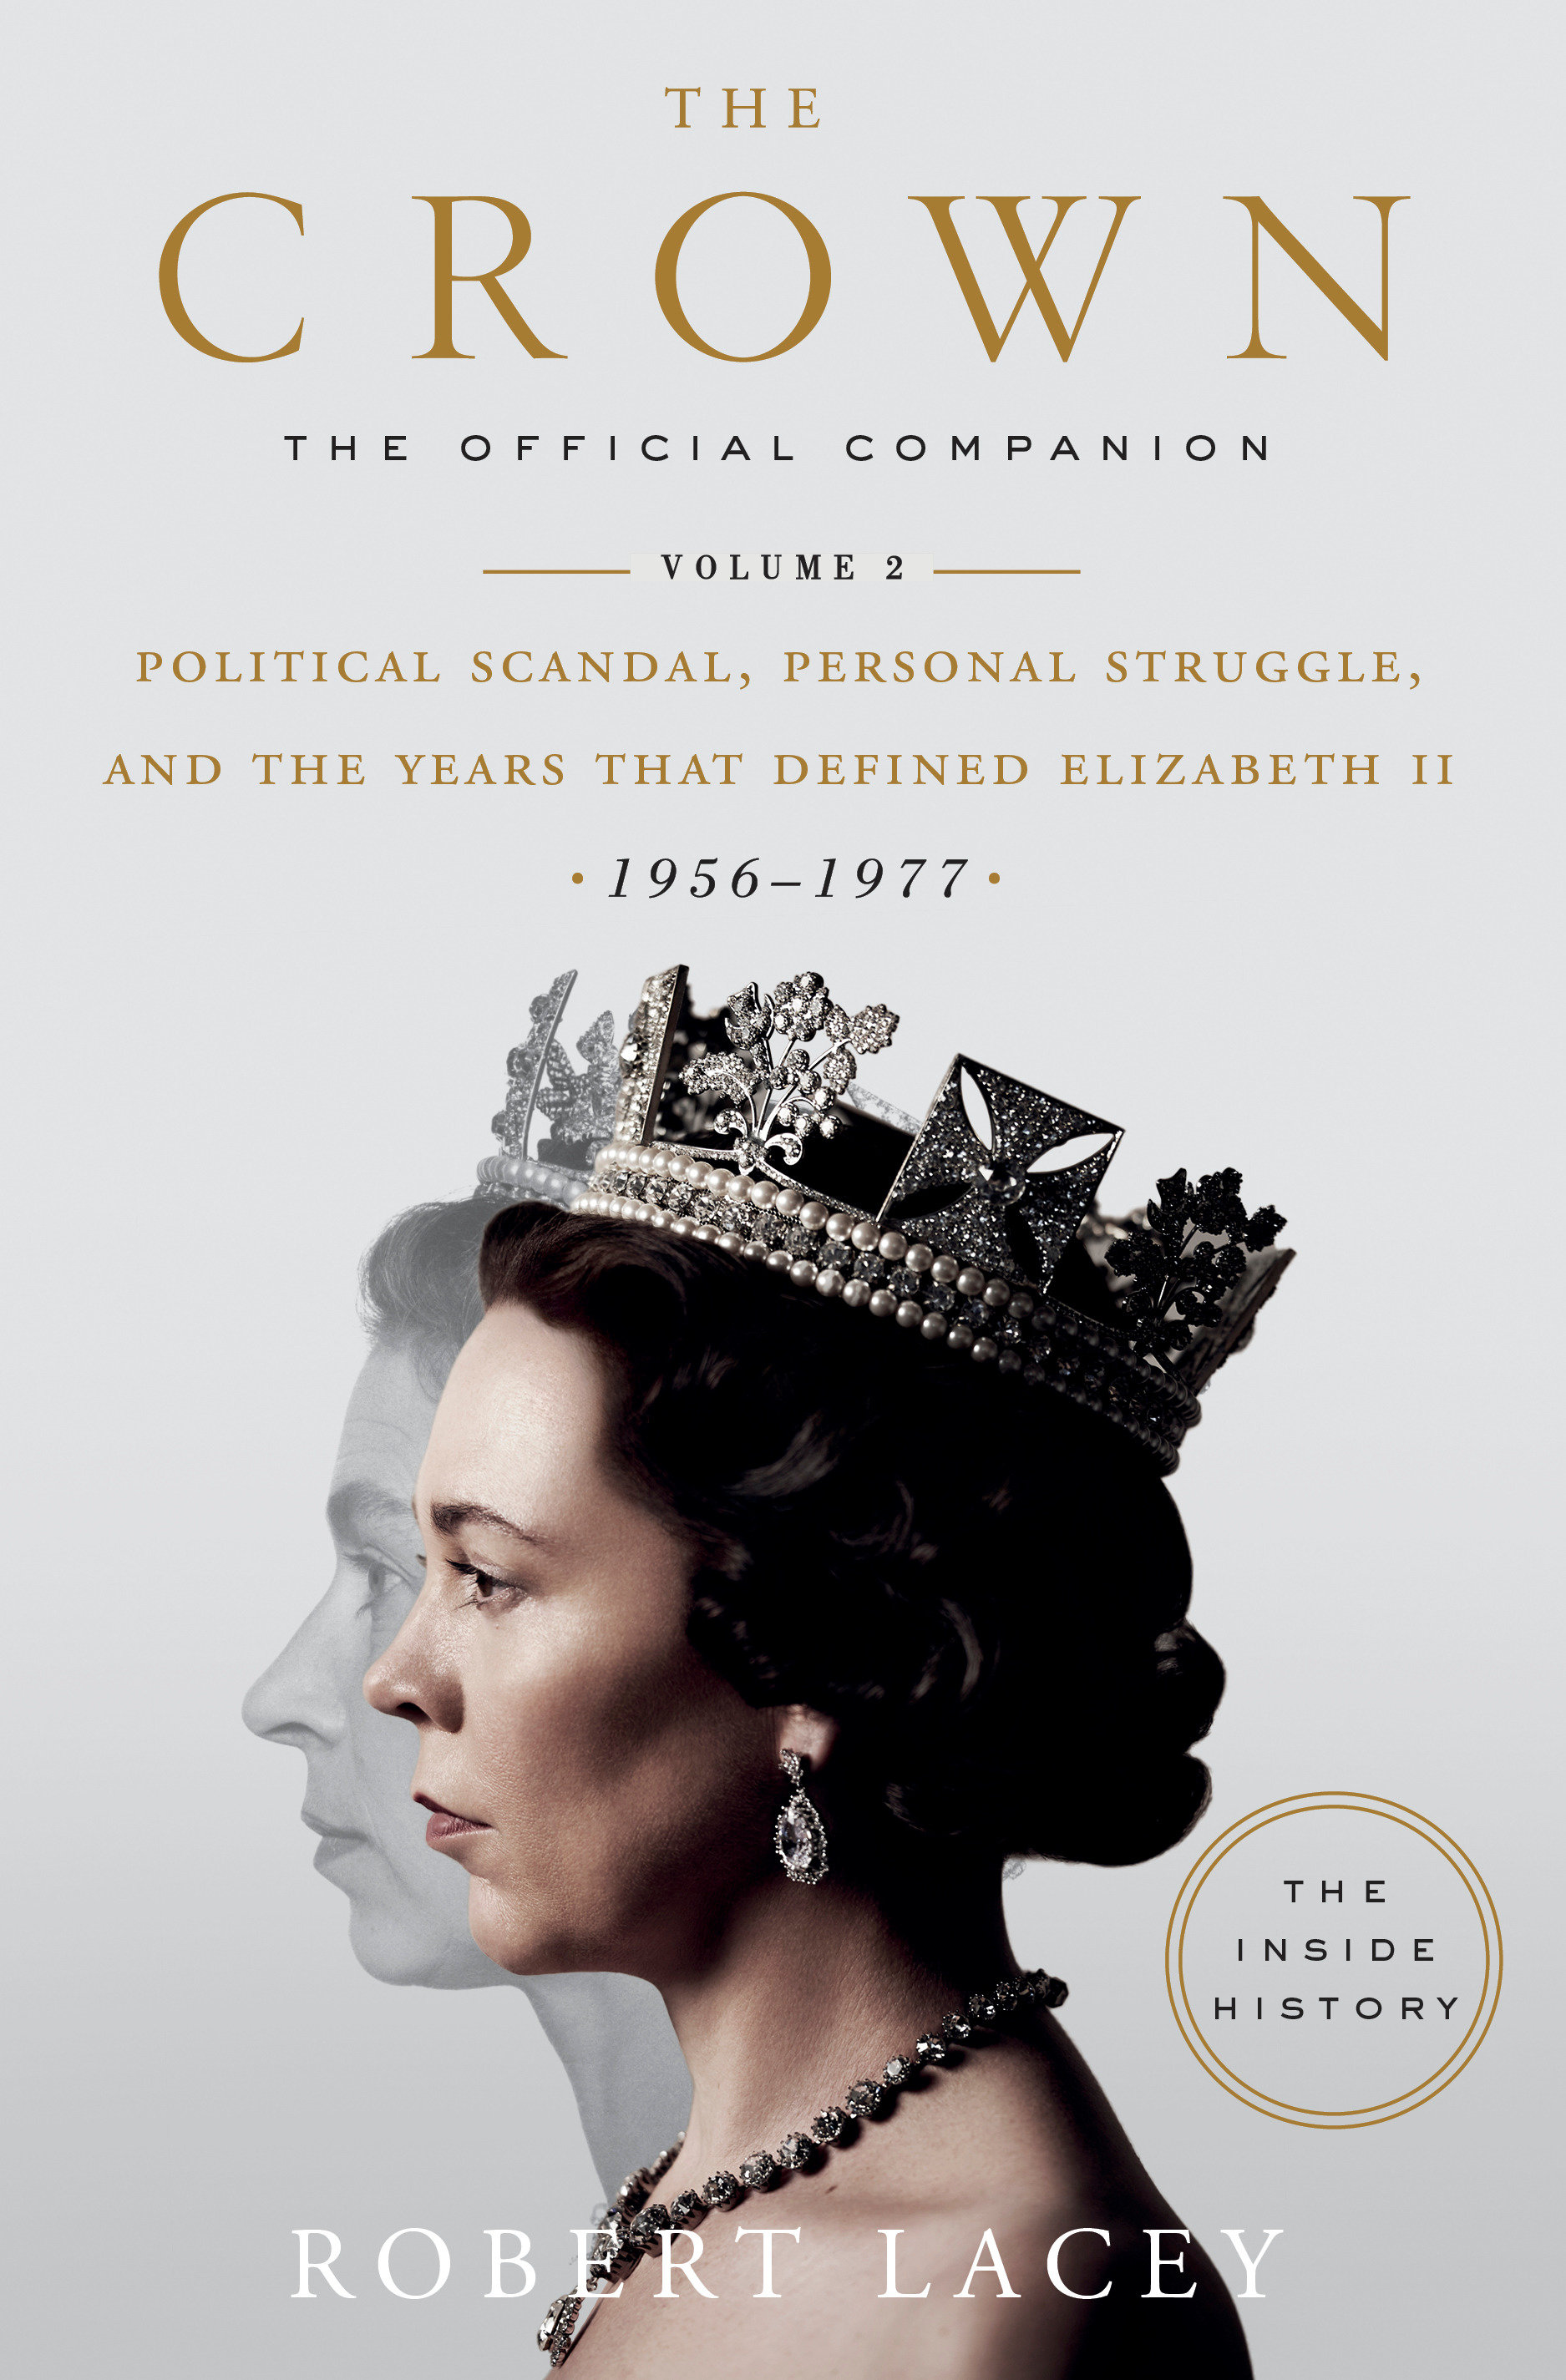 The Crown: The Official Companion, Volume 2 (Hardcover Book)